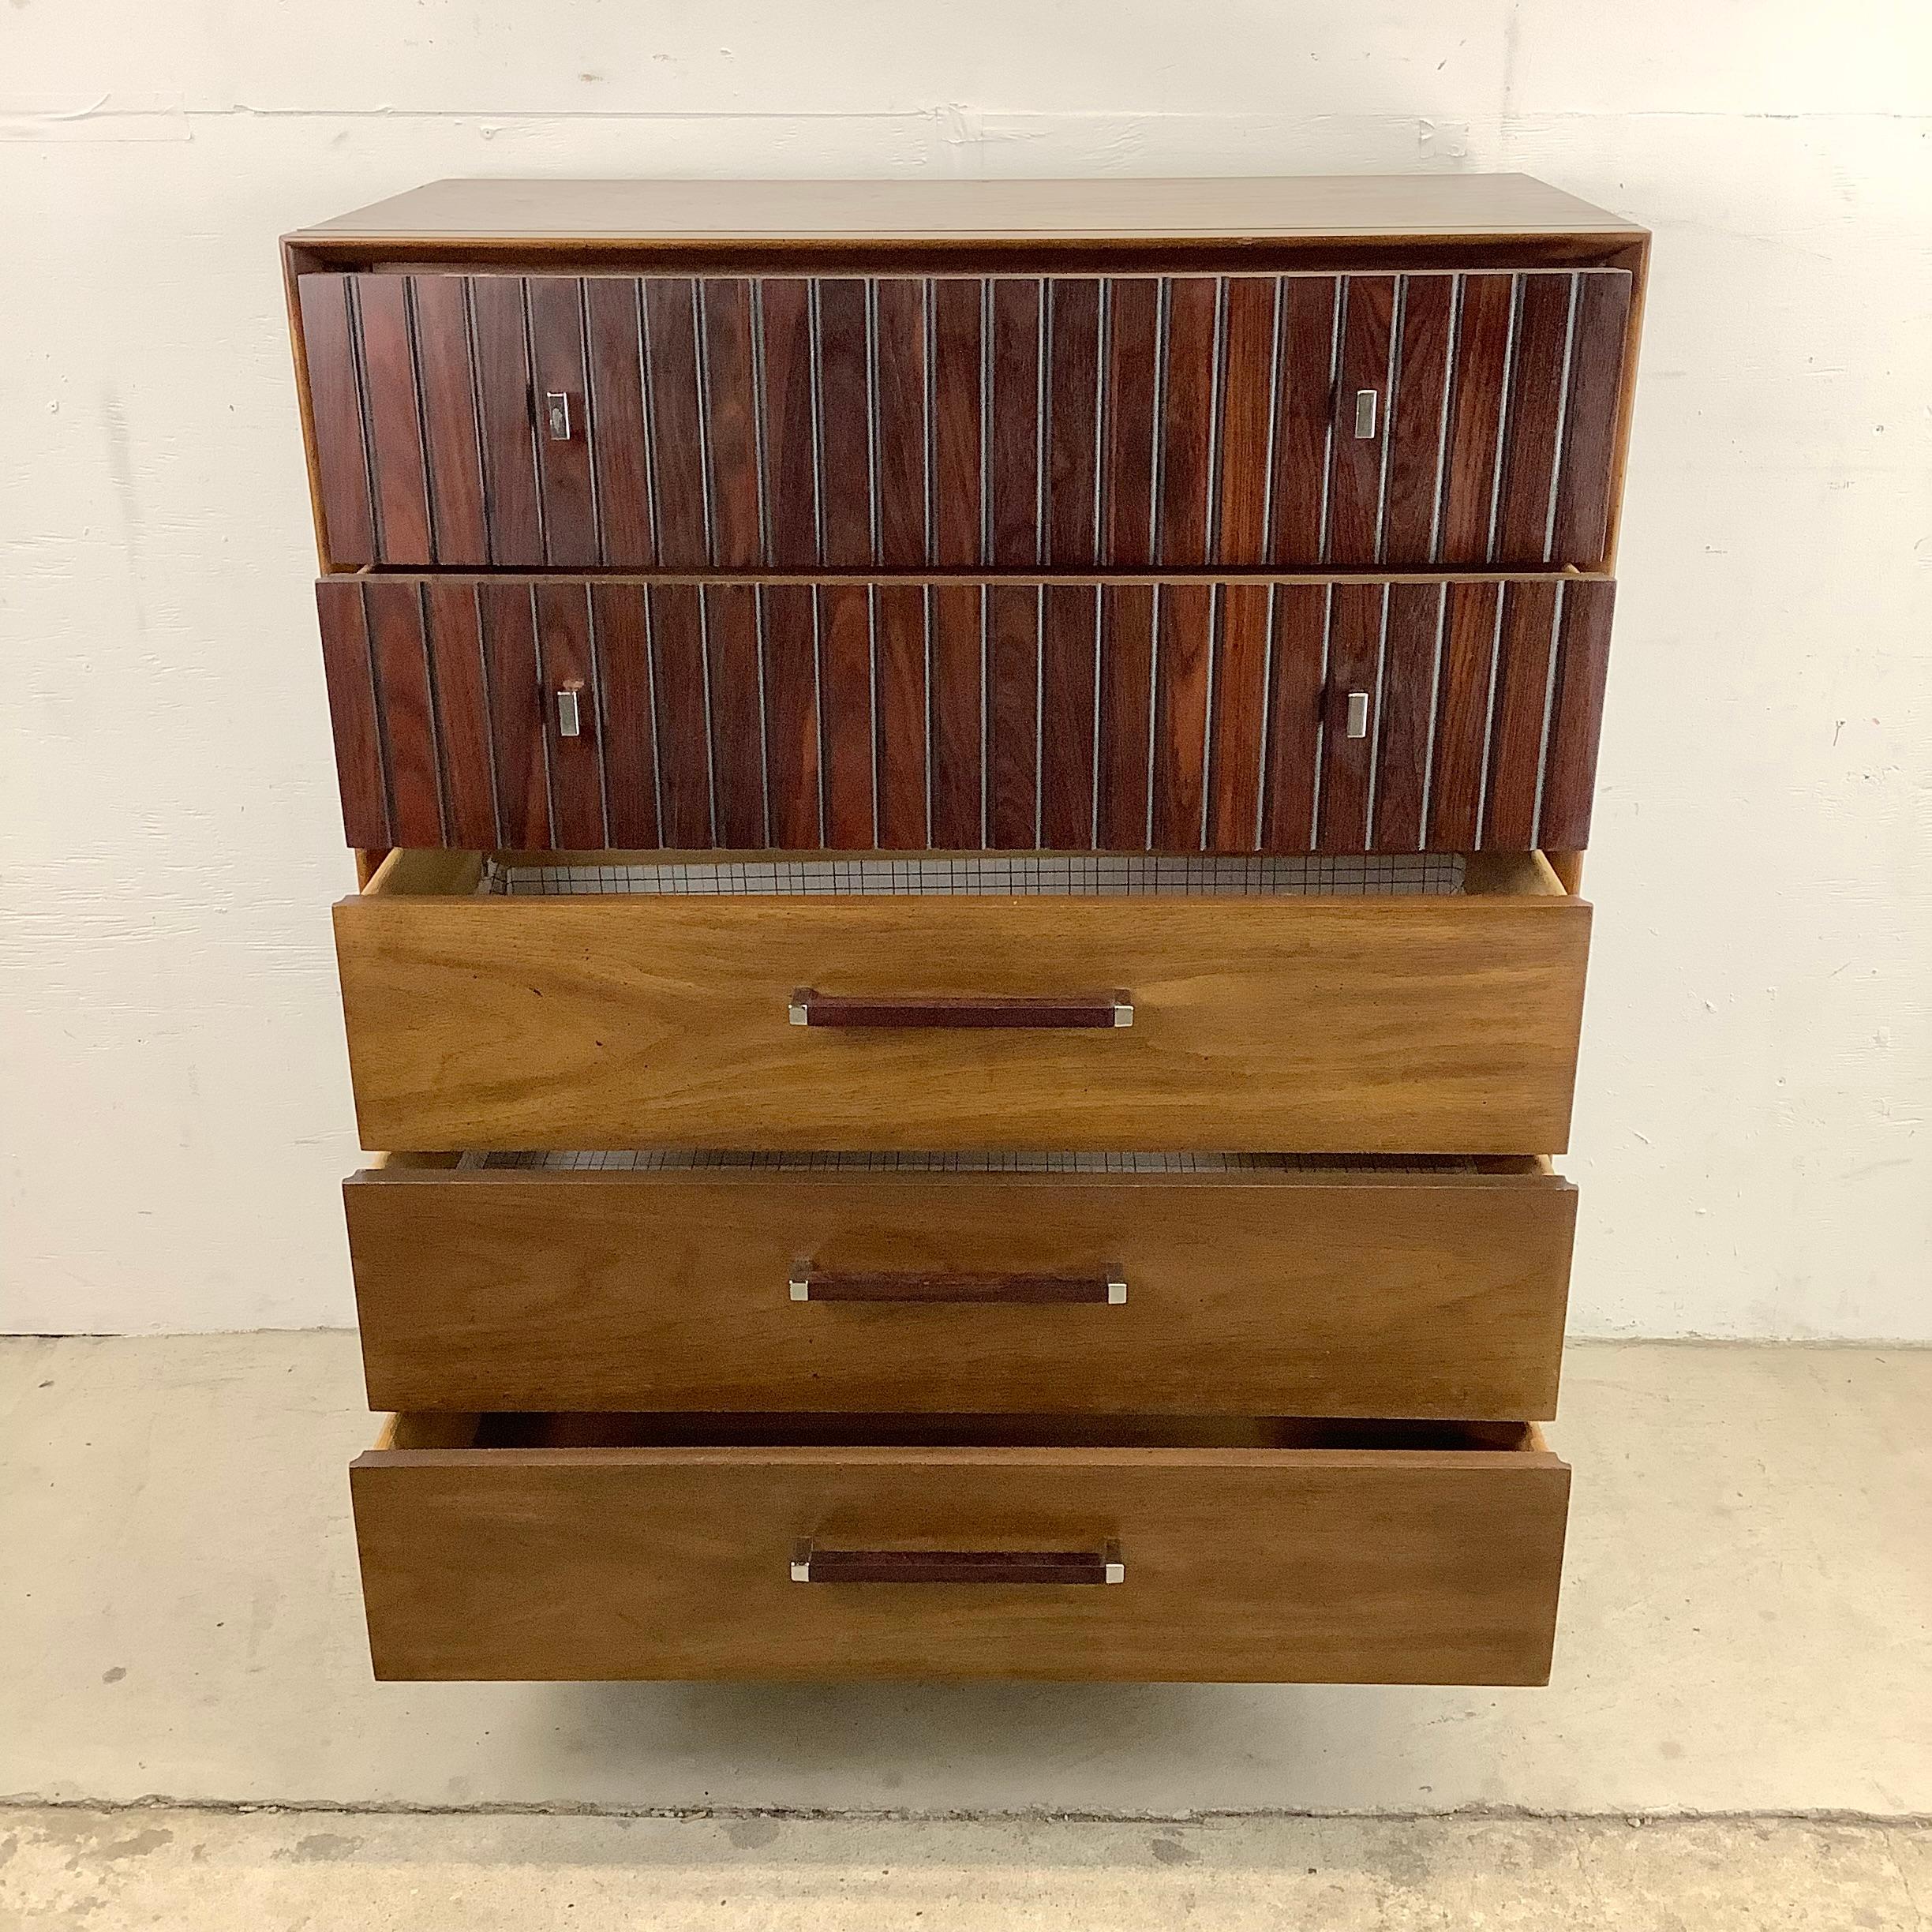 This impressive mid-century modern highboy dresser from Lane furniture features two tone hardwood finish with unique drawer pulls and stylish plinth base- perfect mix of woods and chrome finish add to the clean modern lines of this vintage highboy